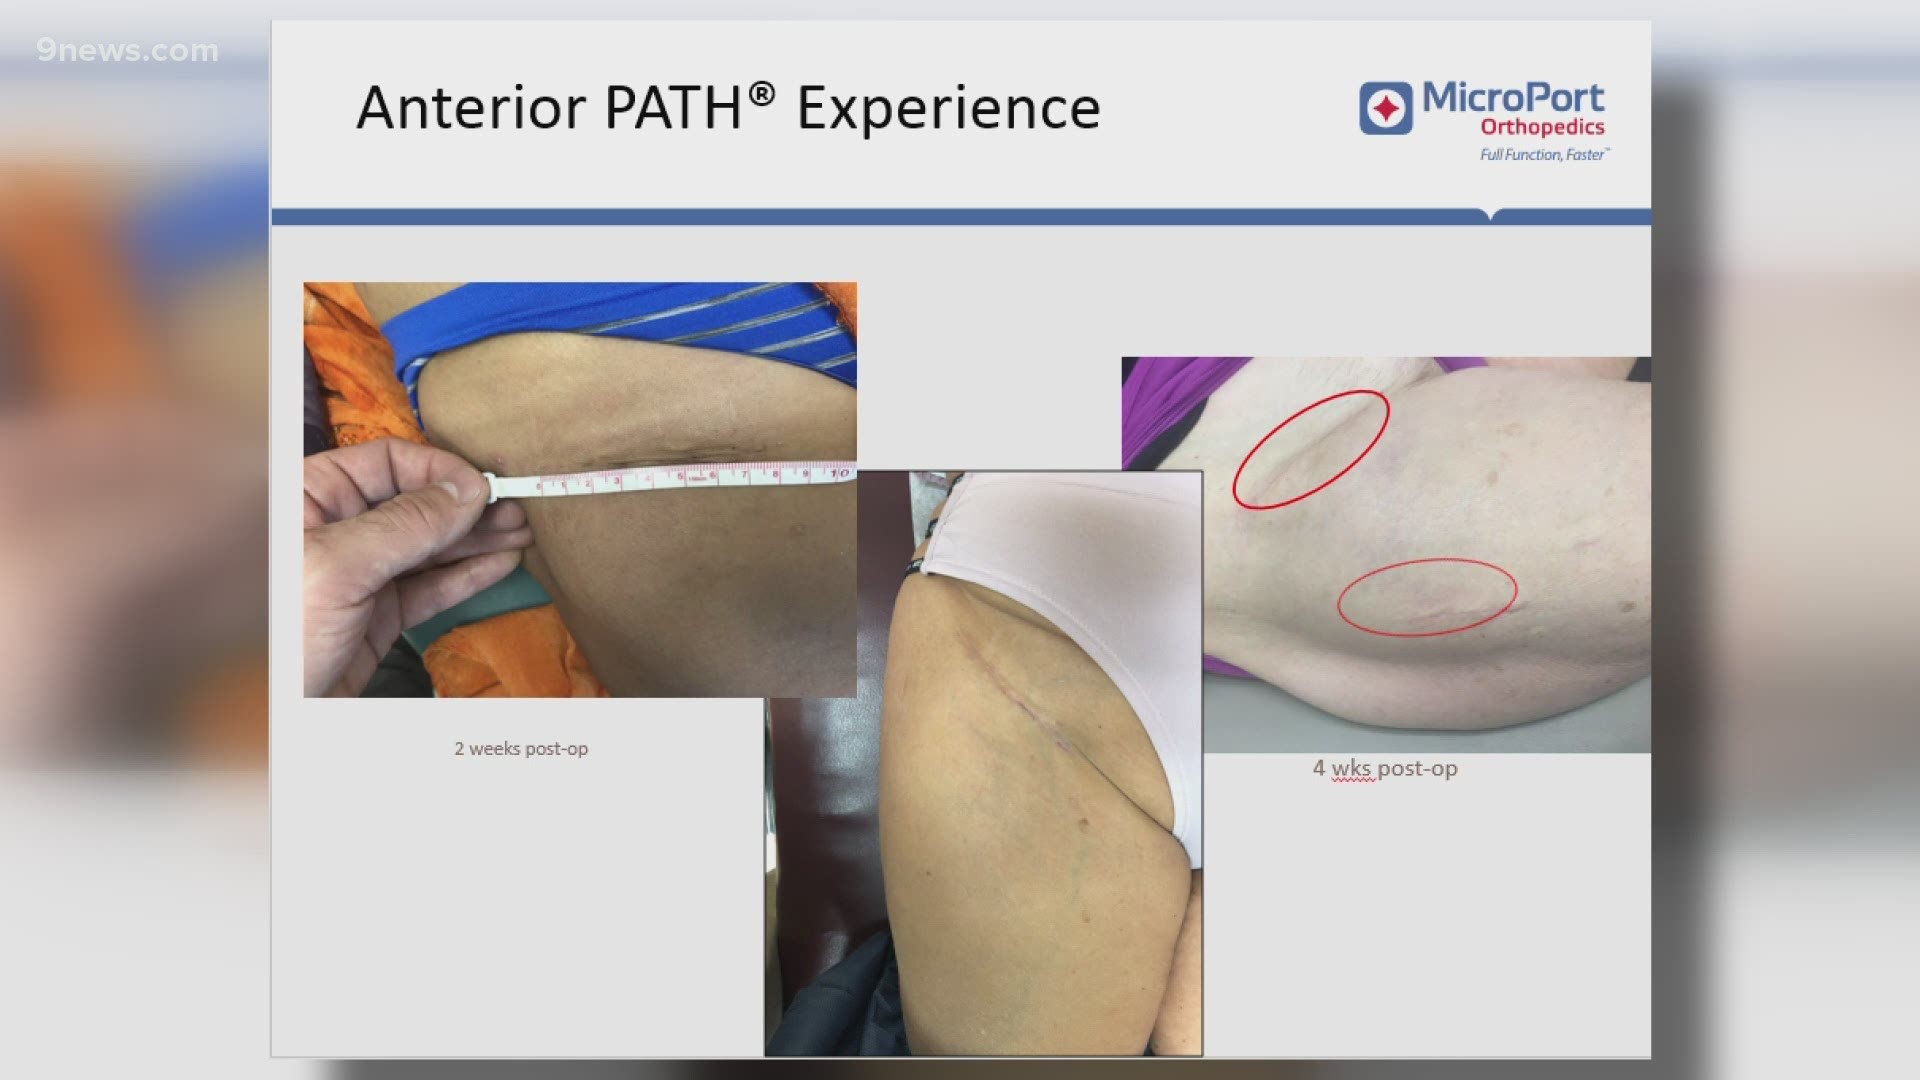 The new procedure is called PATH, which stands for Portal Assisted Total and Hip, and makes it easier to for patients to recover.